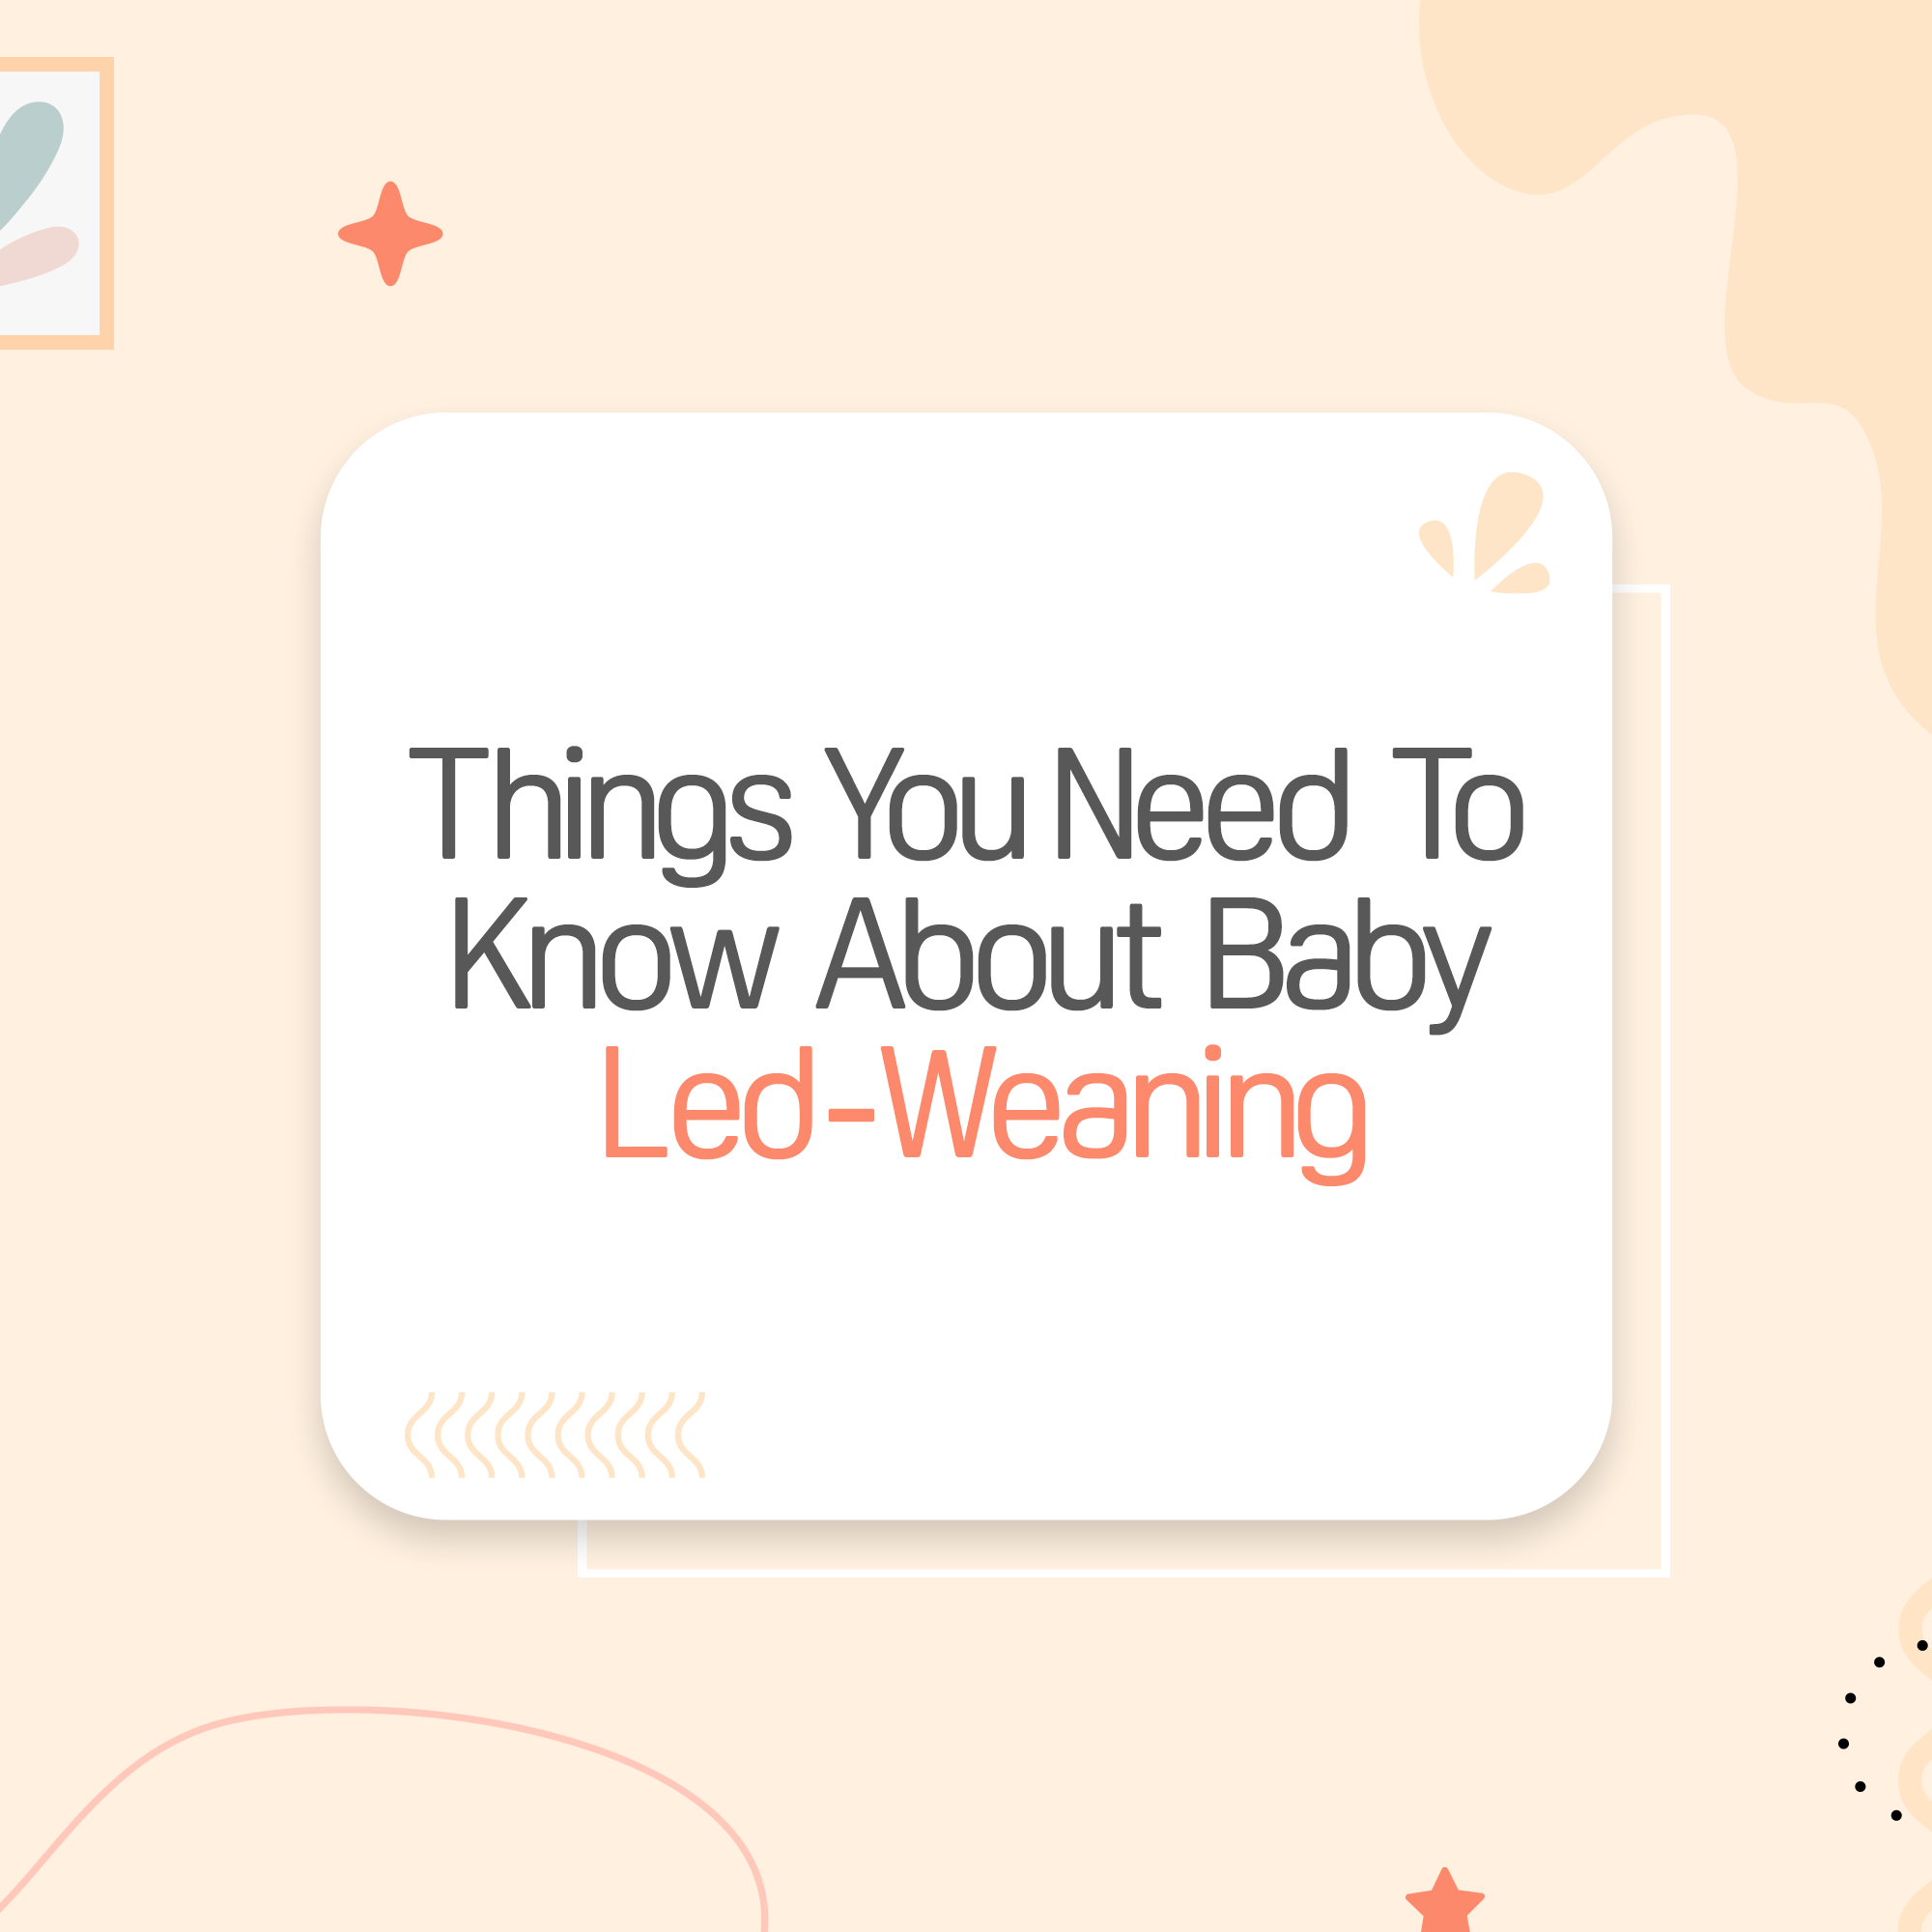 Things You Need To Know About Baby Led-Weaning